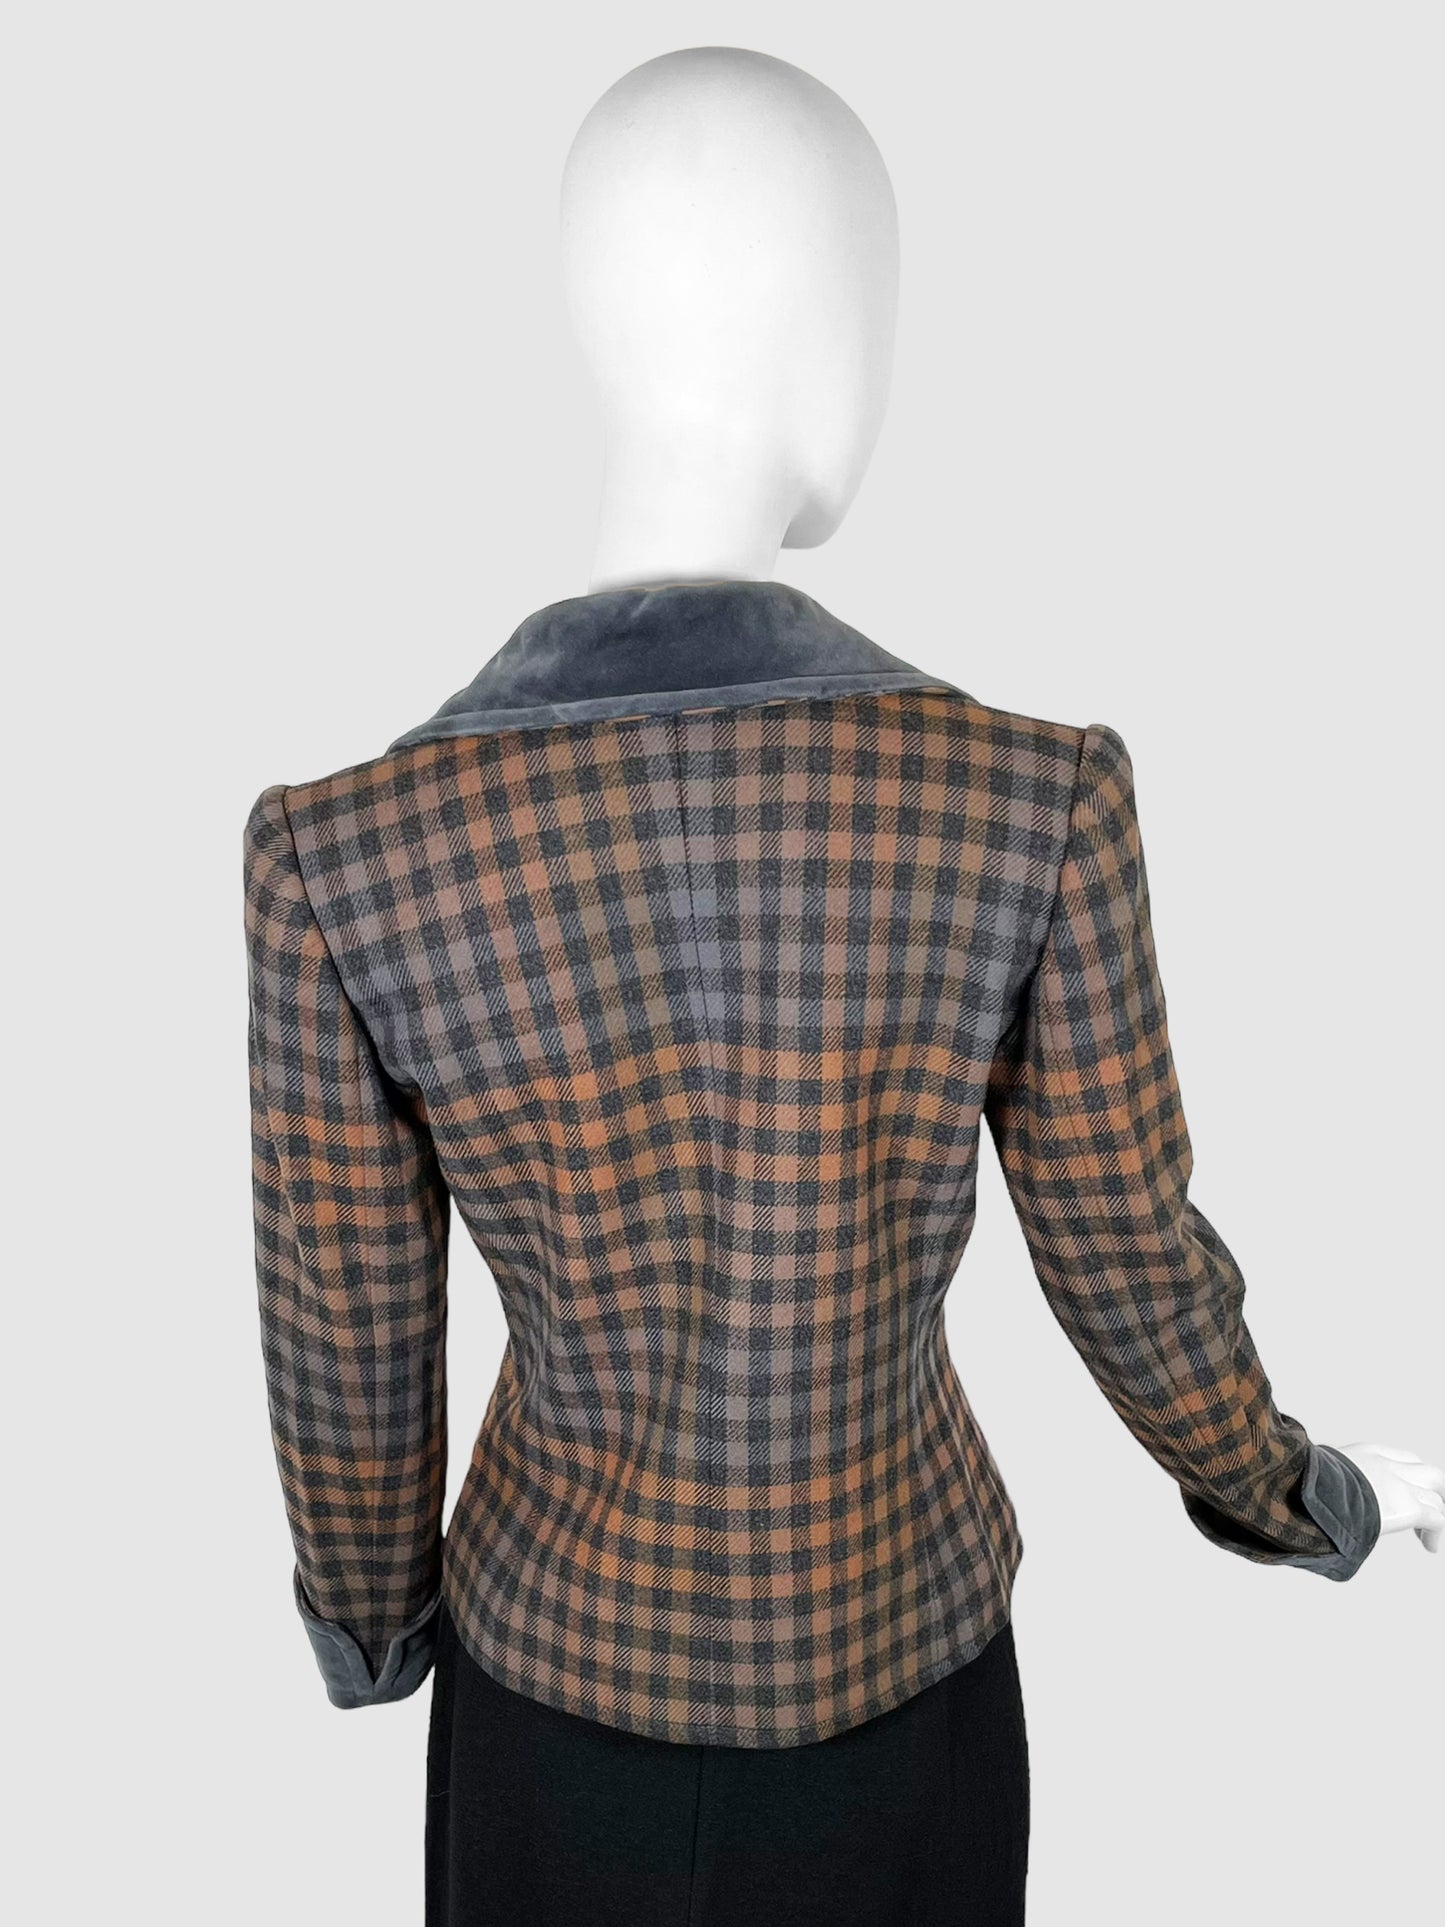 Givenchy Gingham Double-Breasted Wool Jacket - Size 38